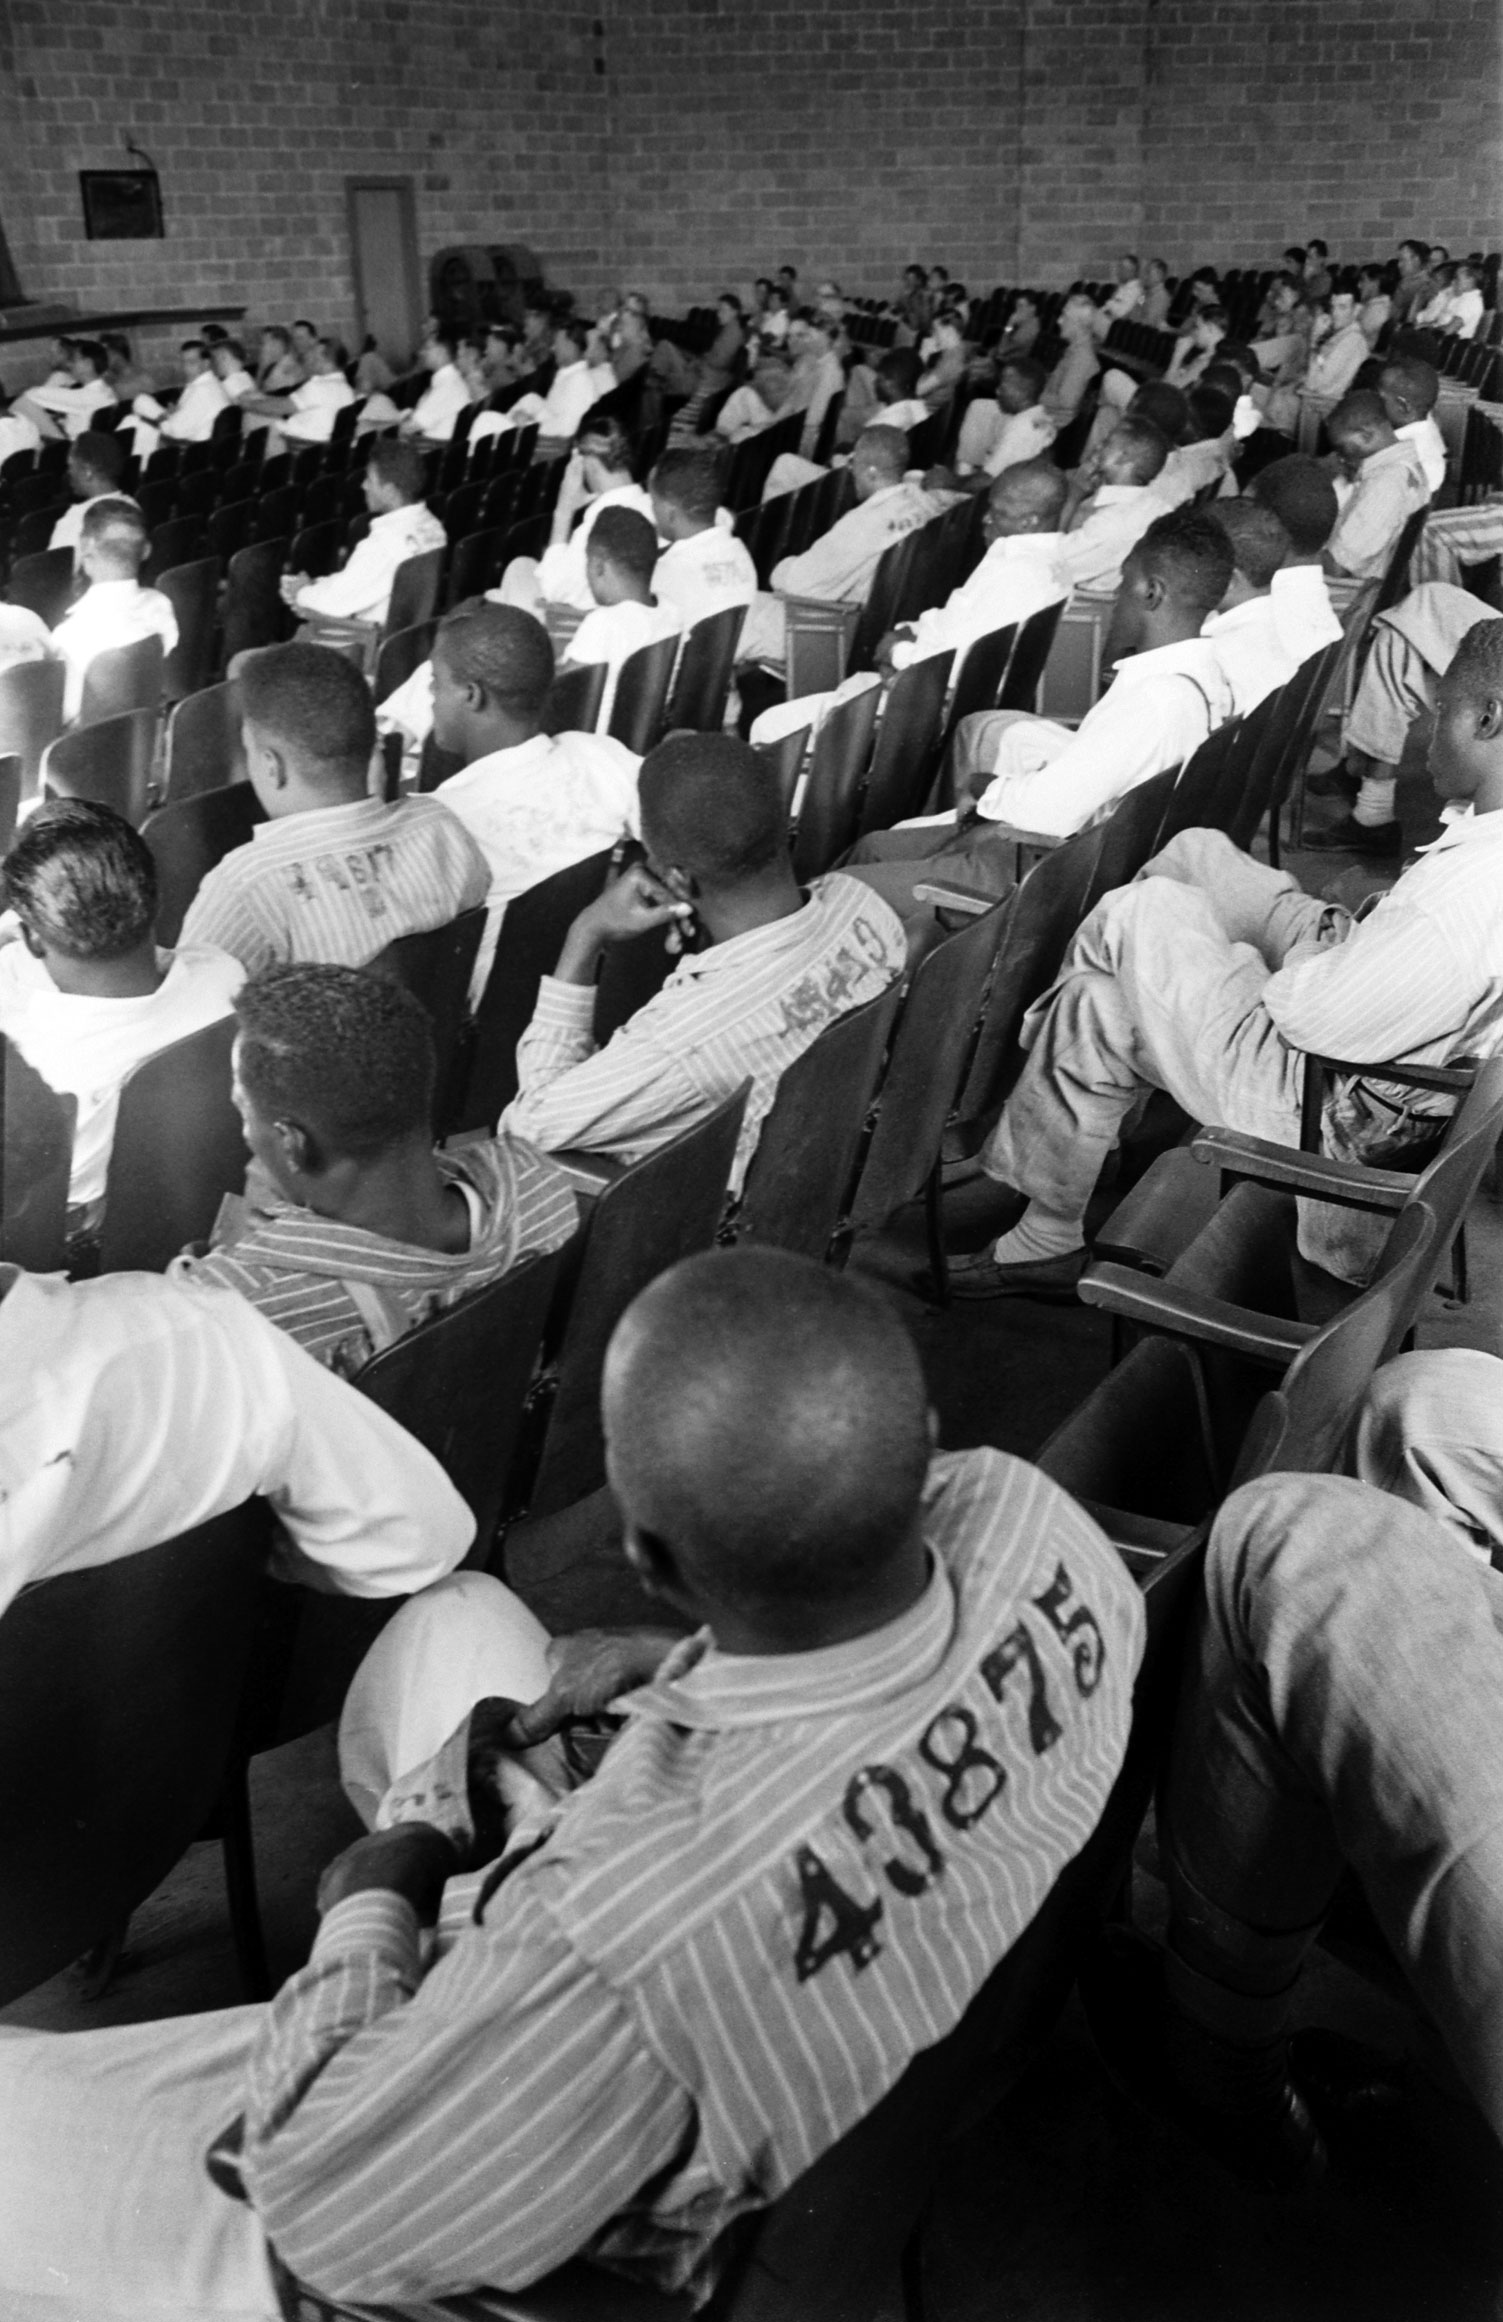 Prisoners at the Tennessee State Penitentiary auditorium, 1953.